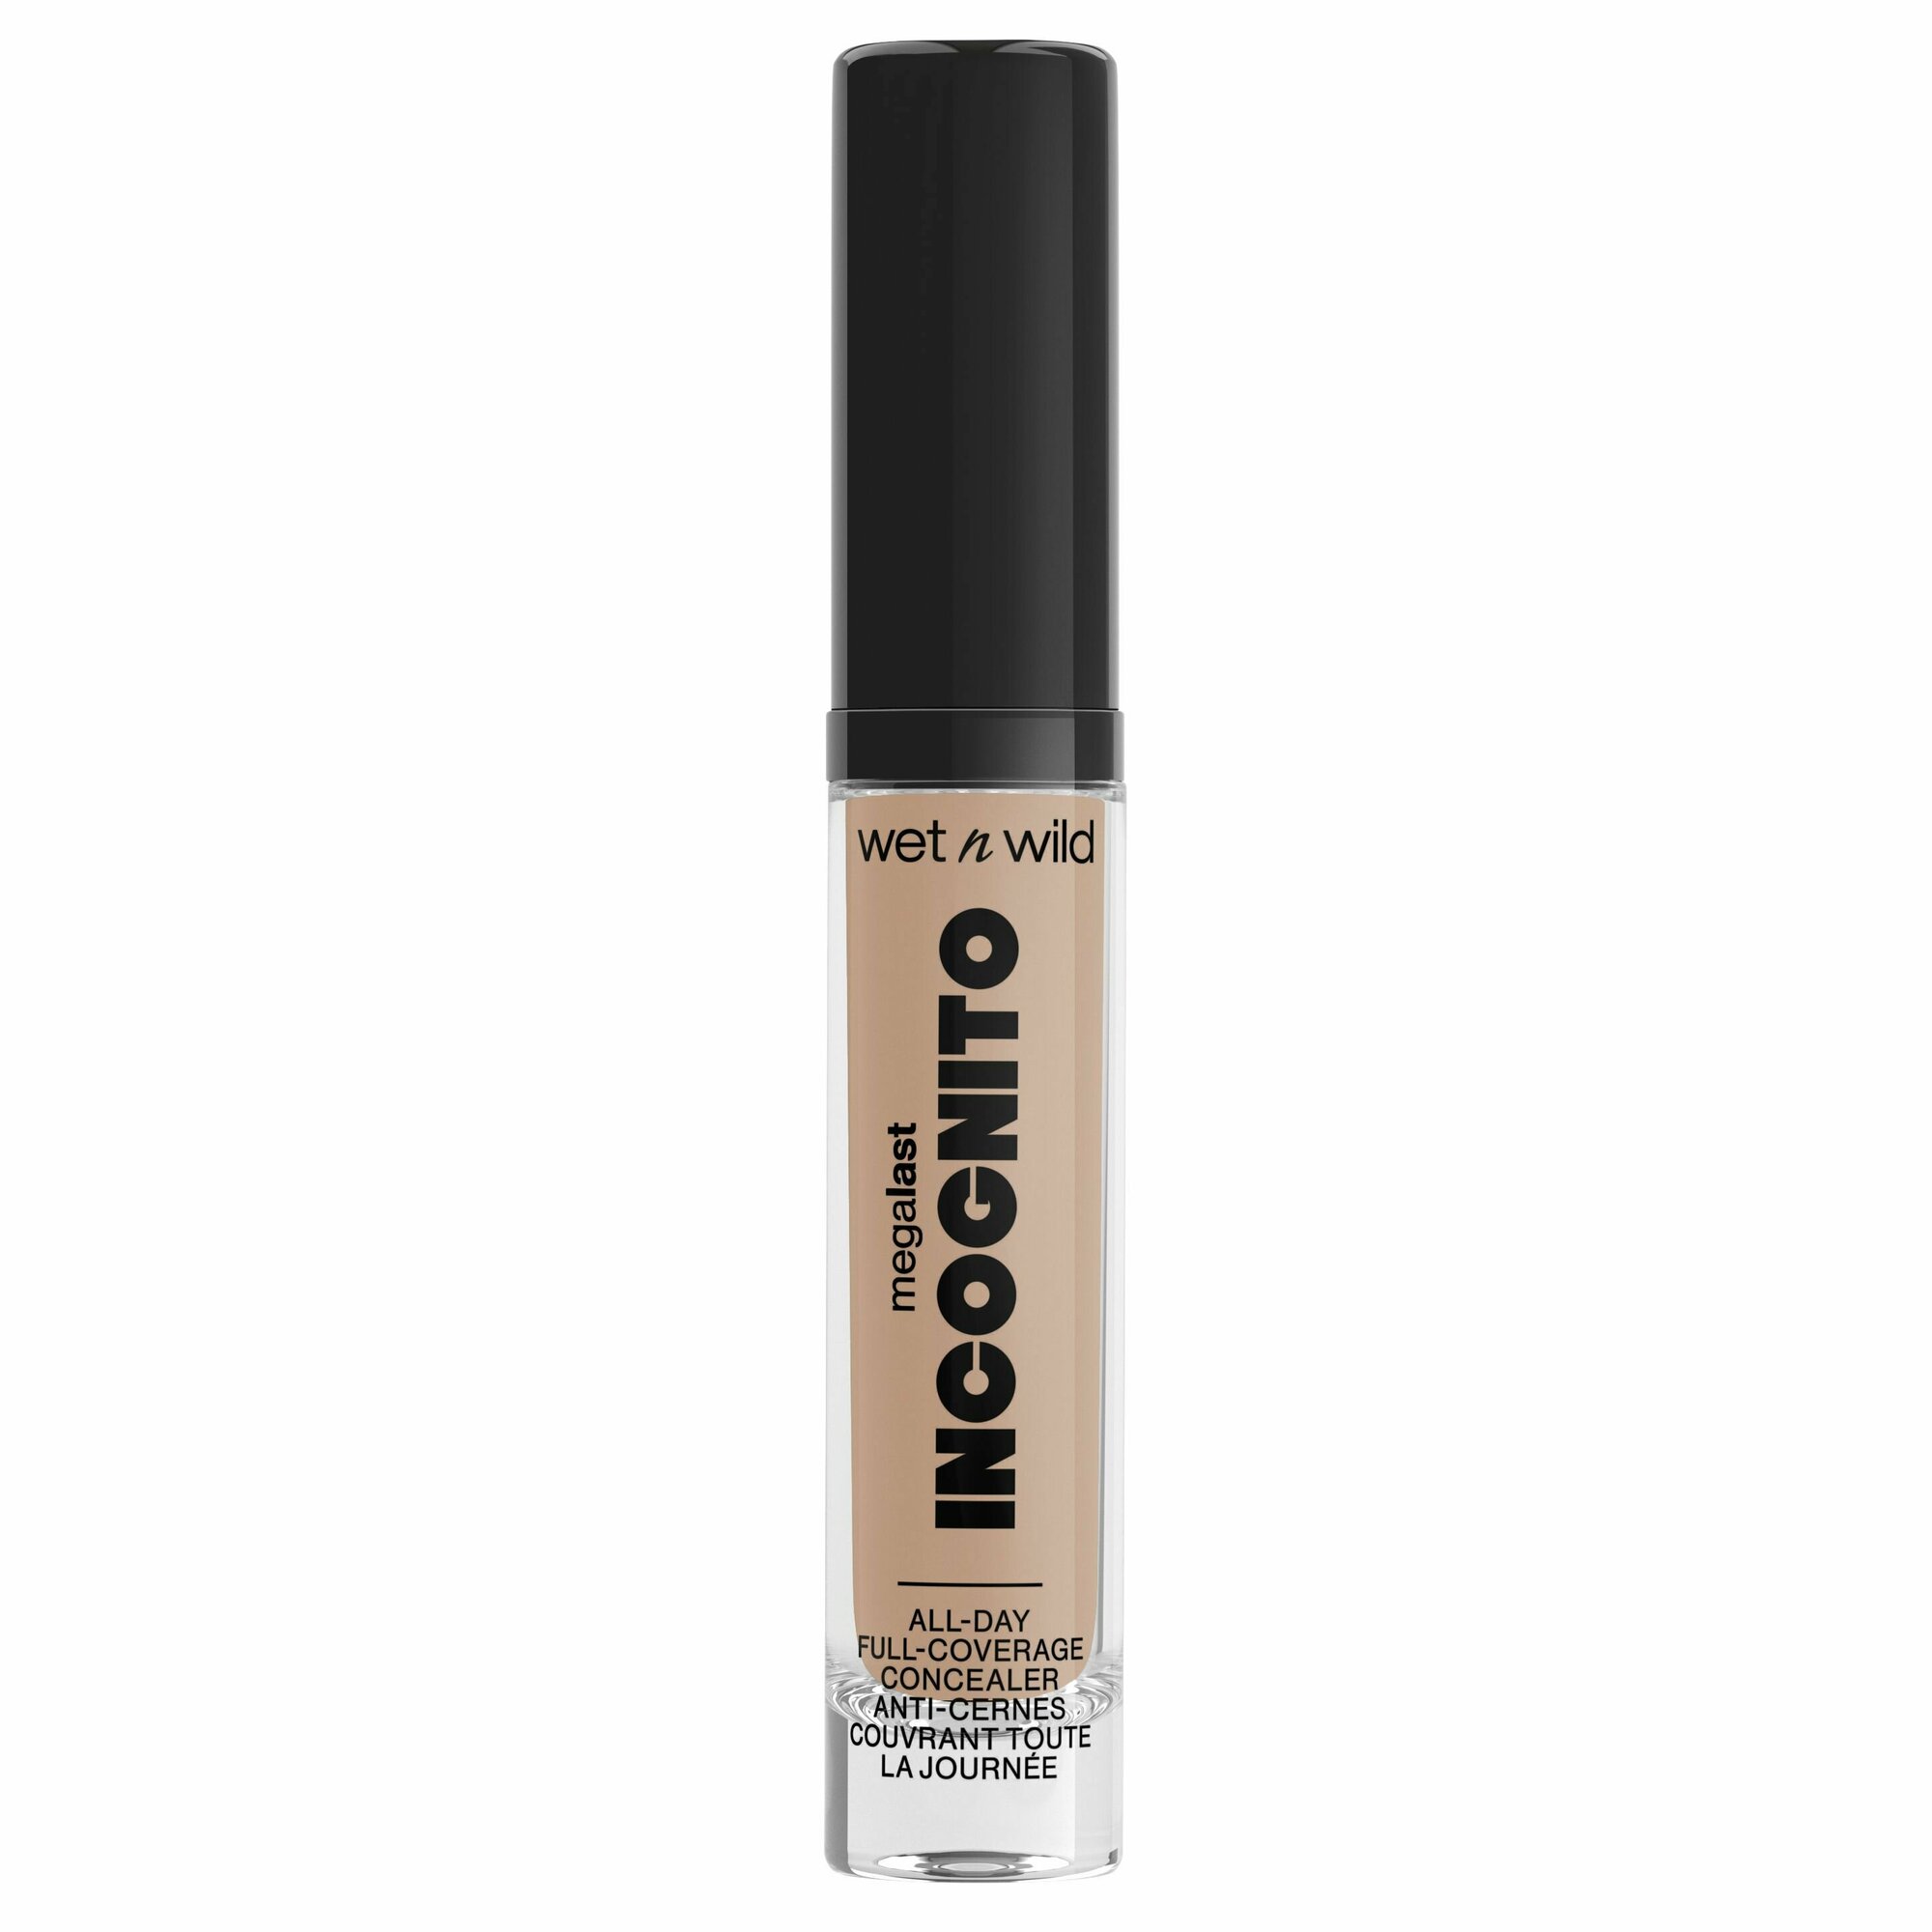 Wet n Wild Консилер для лица MegaLast Incognito All-Day Full Coverage Concealer Тон 1111900e light honey